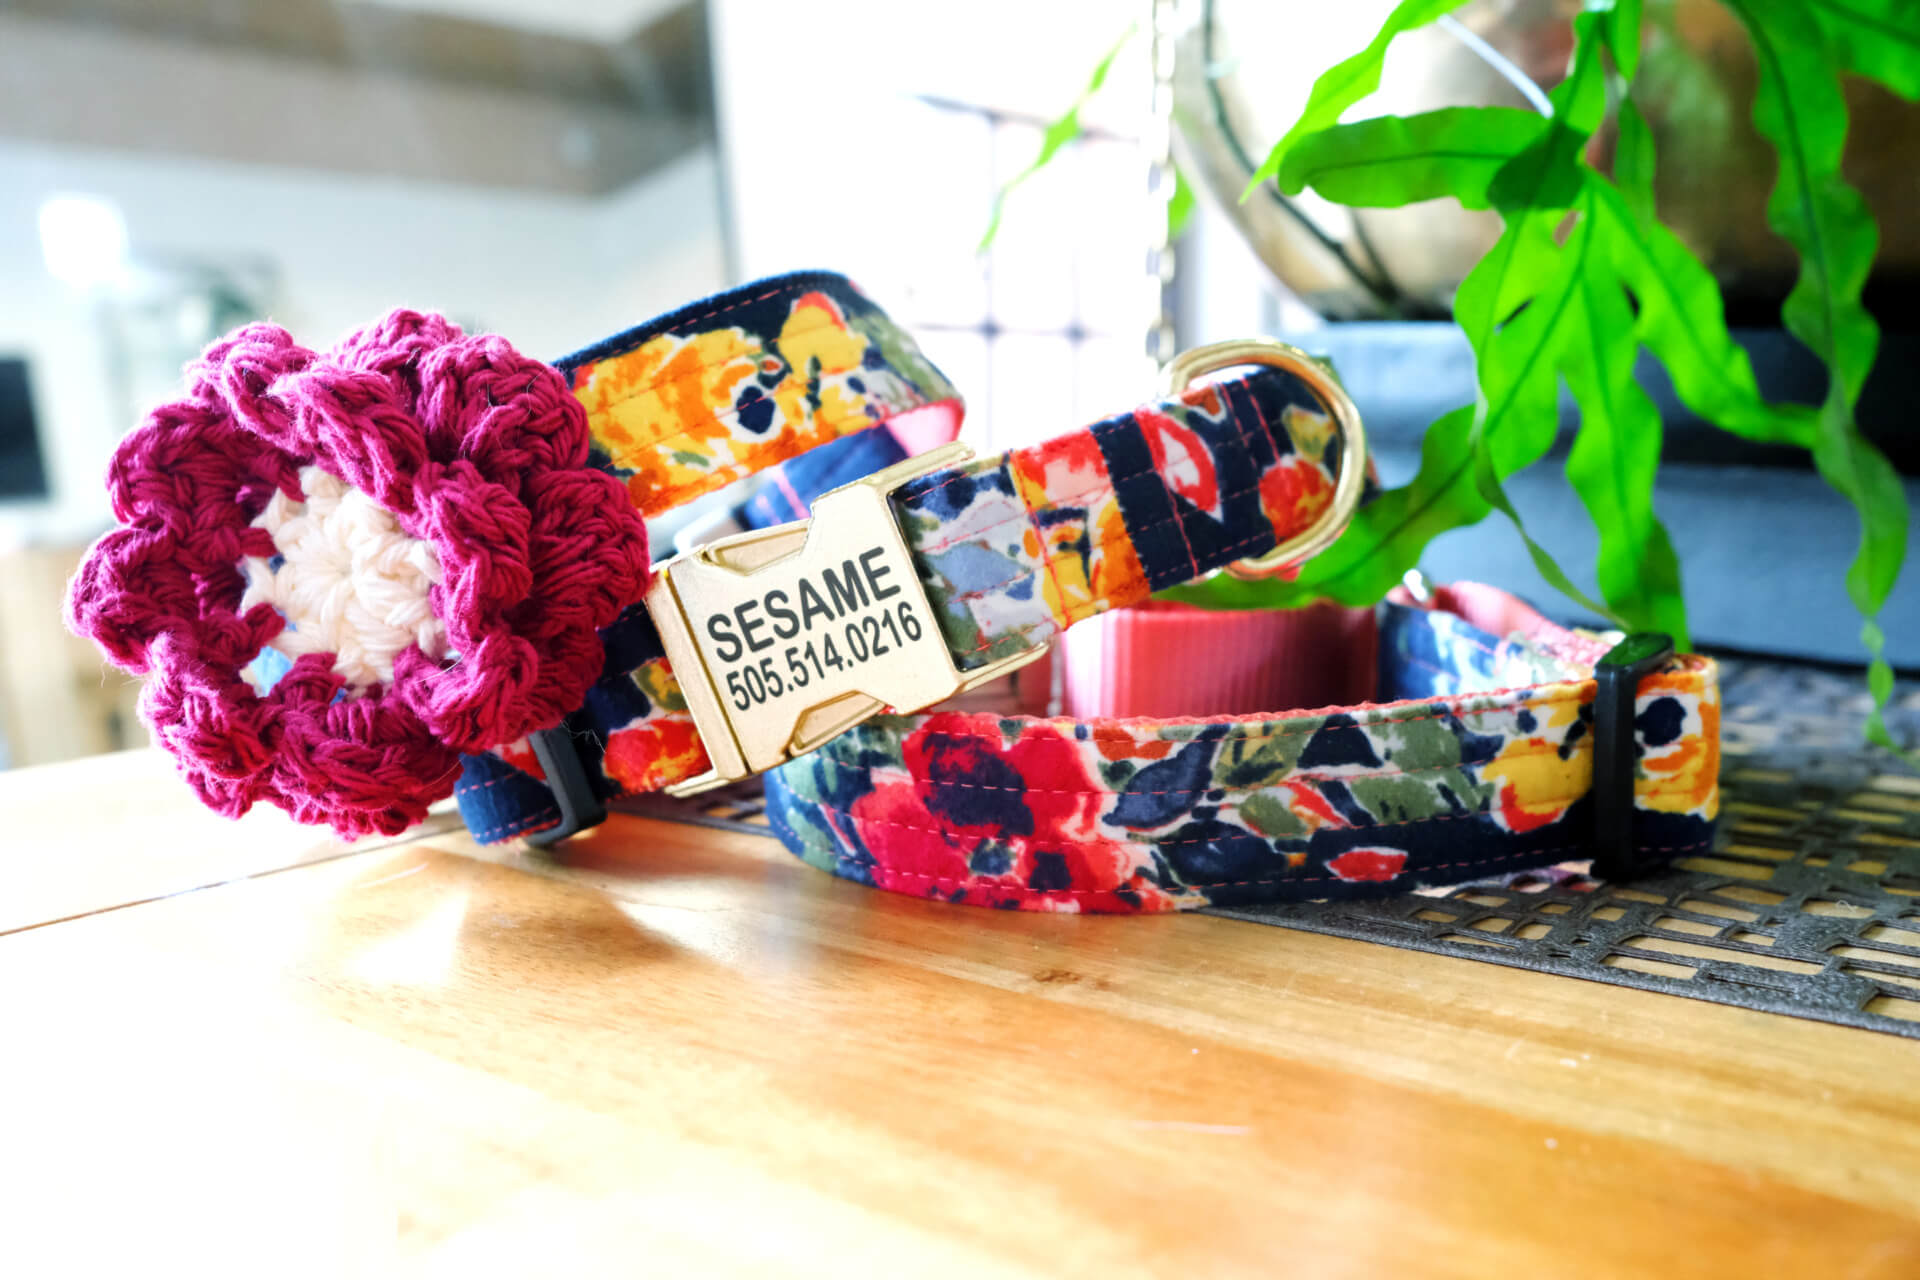 Autumn' Floral Flannel - Personalized Martingale Dog Collar